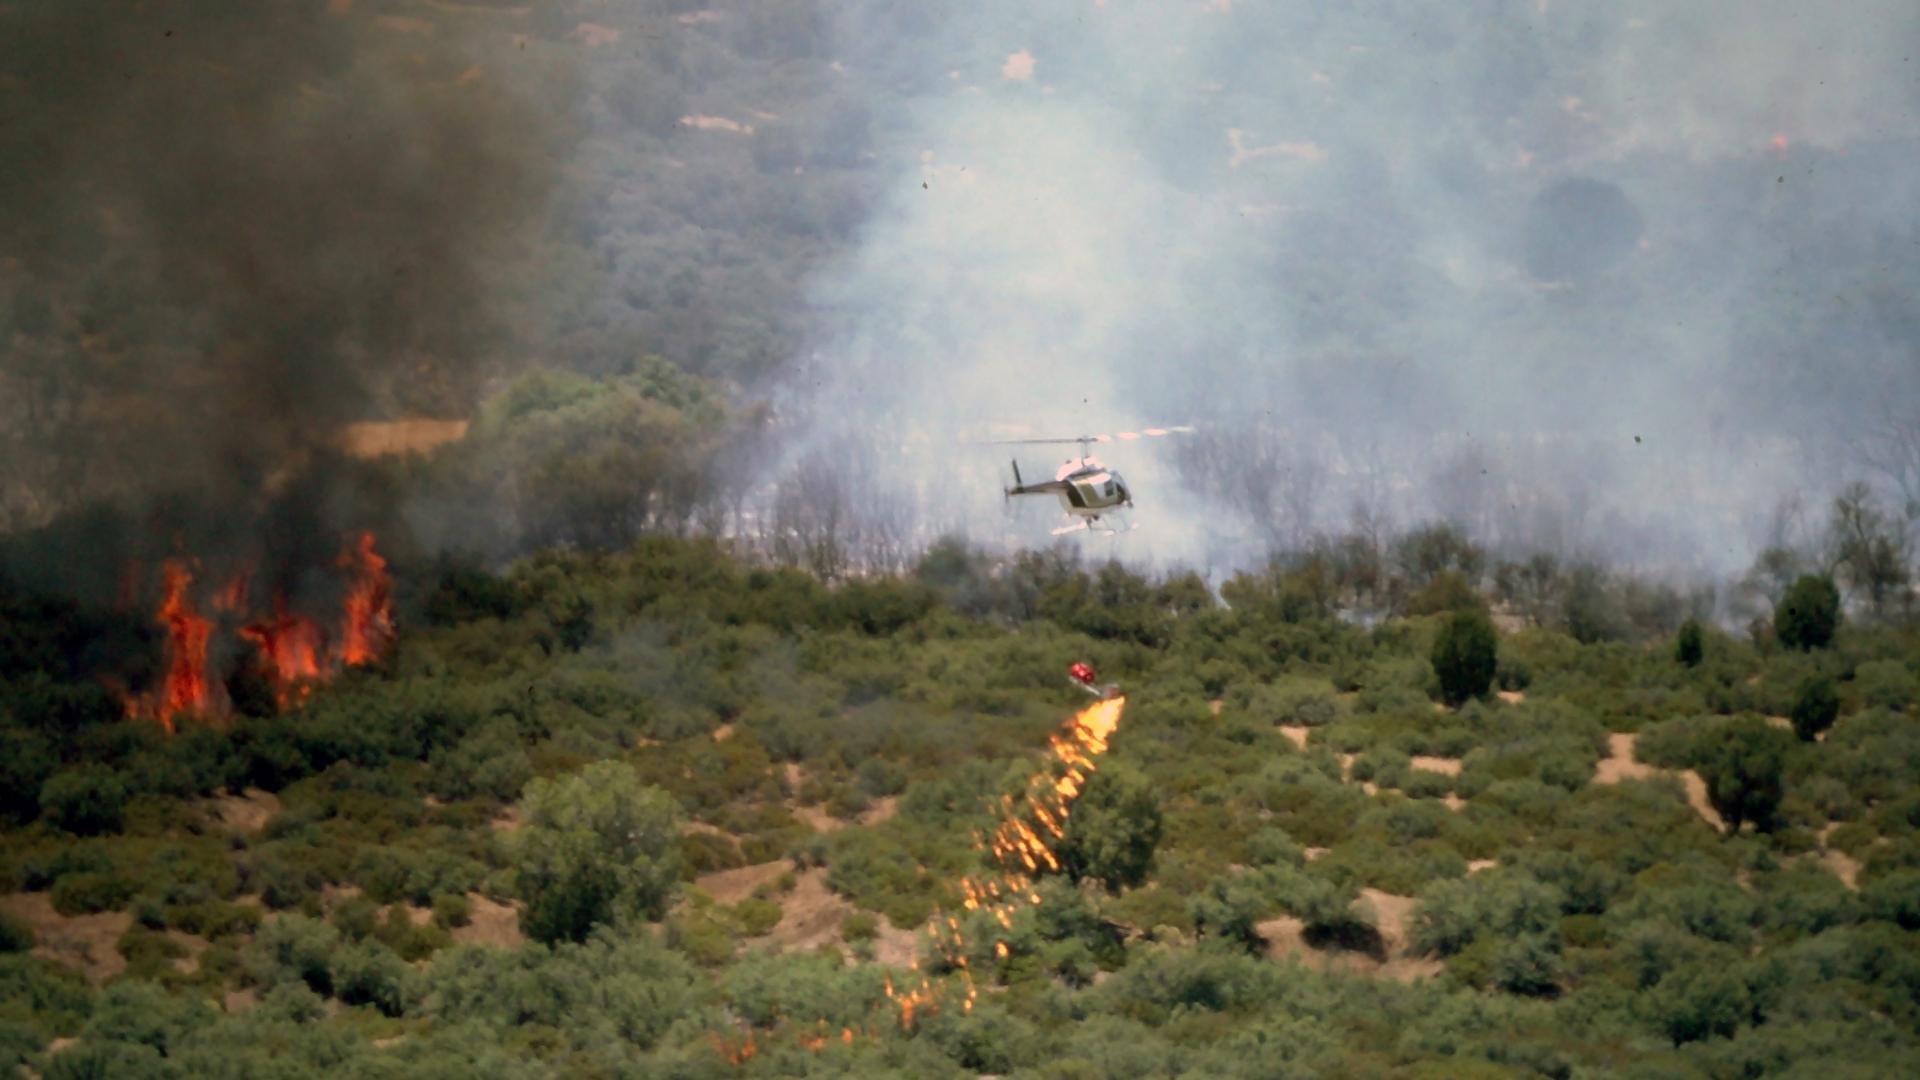 Helichopter dropping fire in brush land